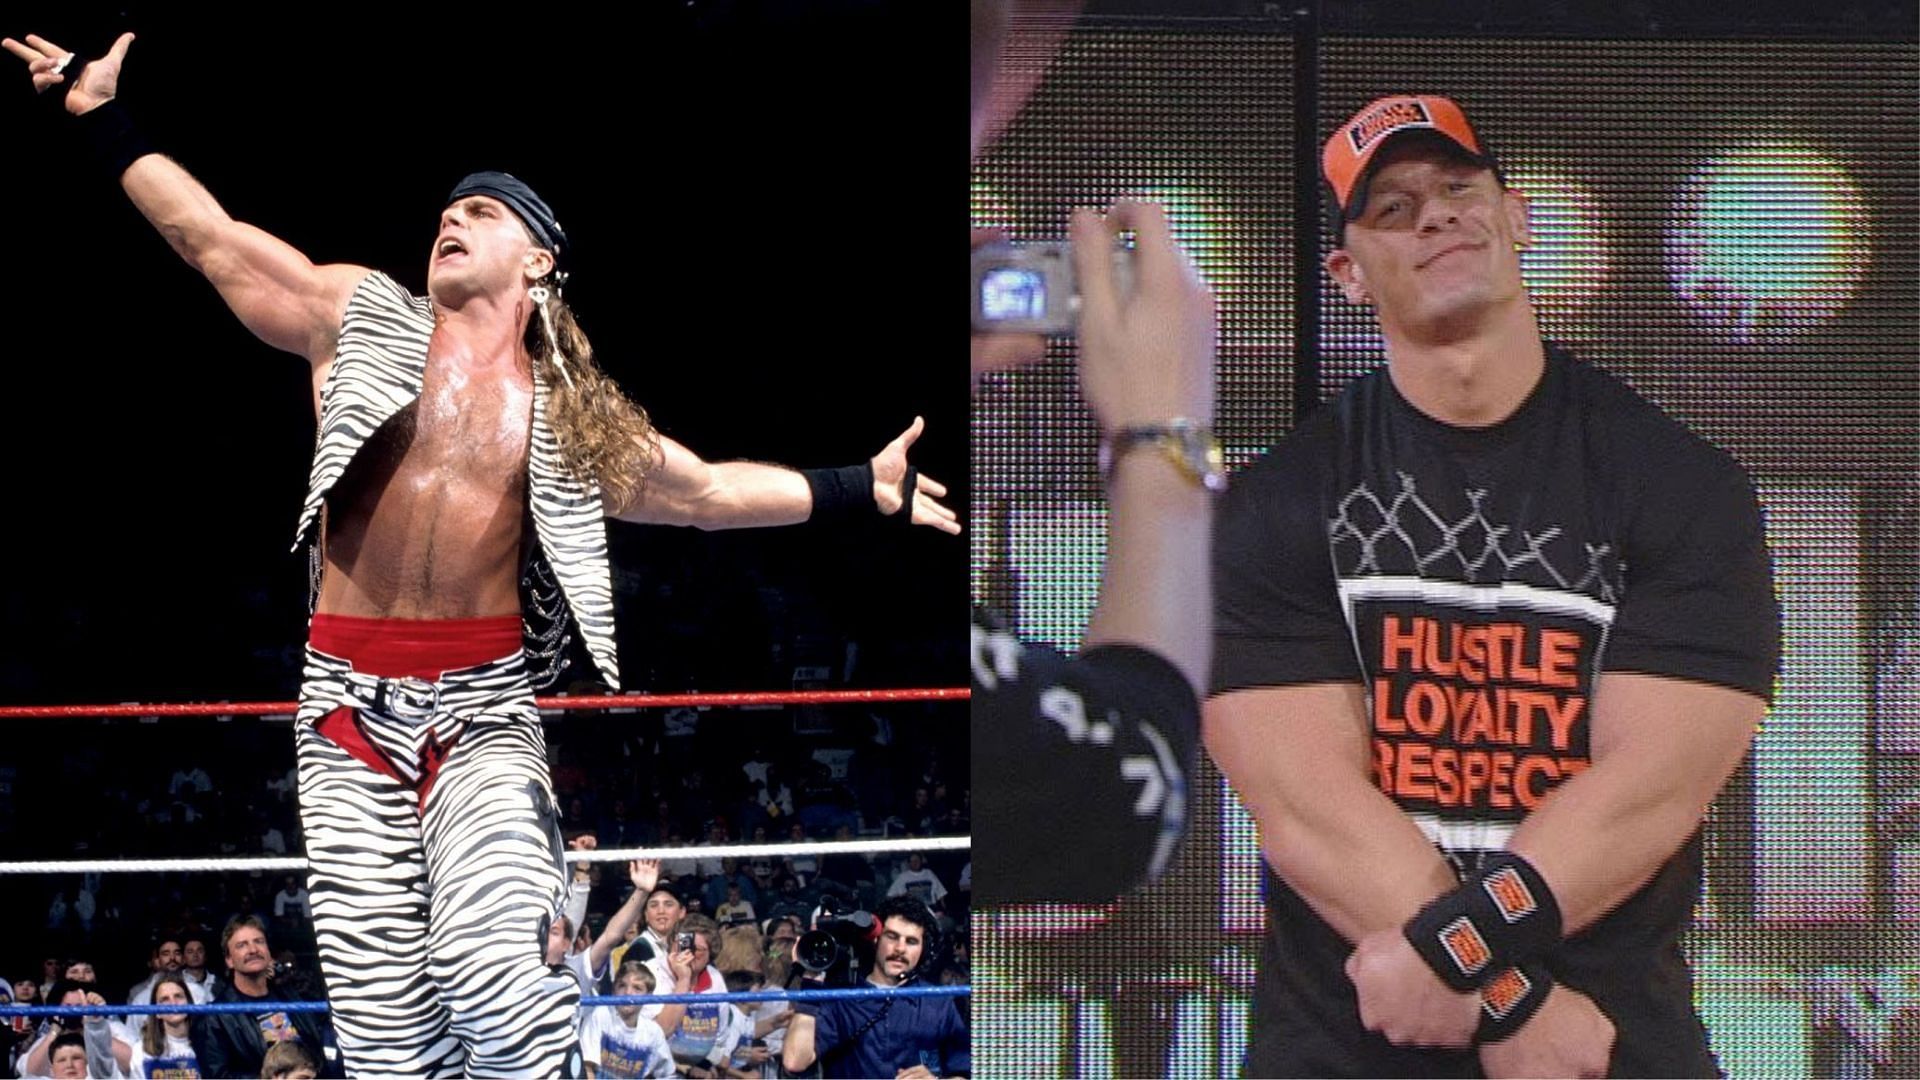 From Shawn Michaels to John Cena, the Royal Rumble has seen many historic moments.